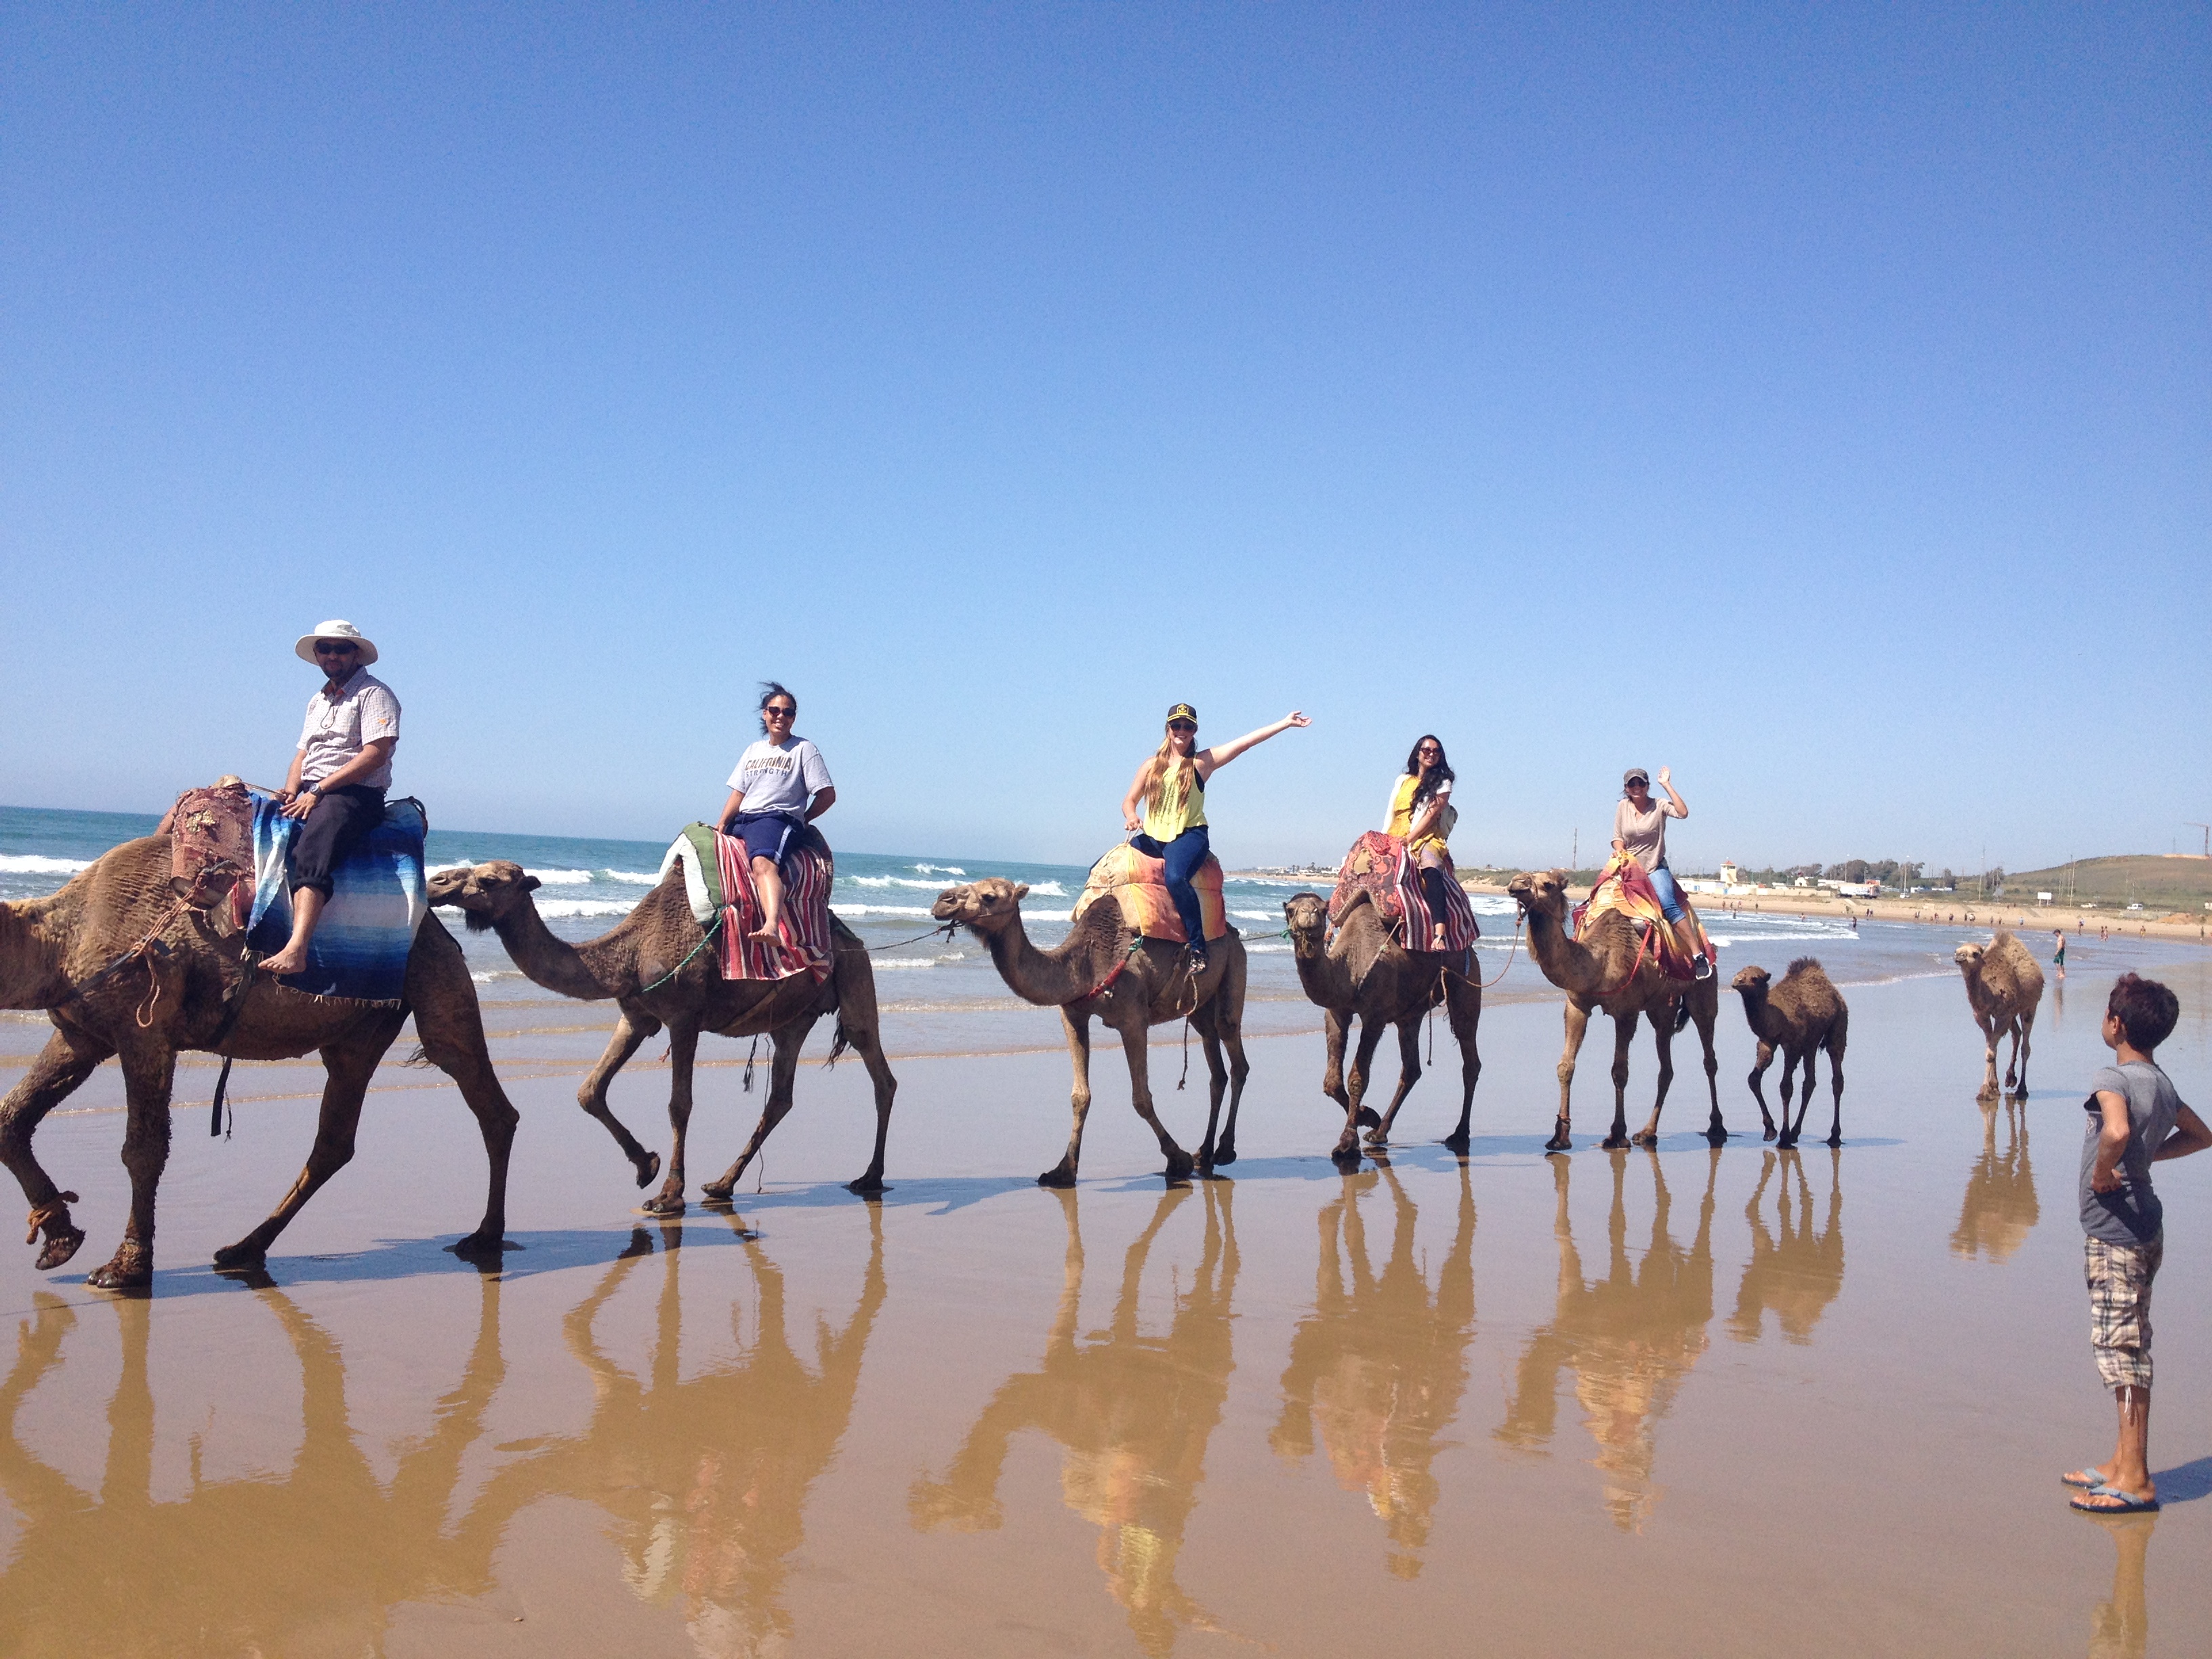 Cadets ride camels during their international experience